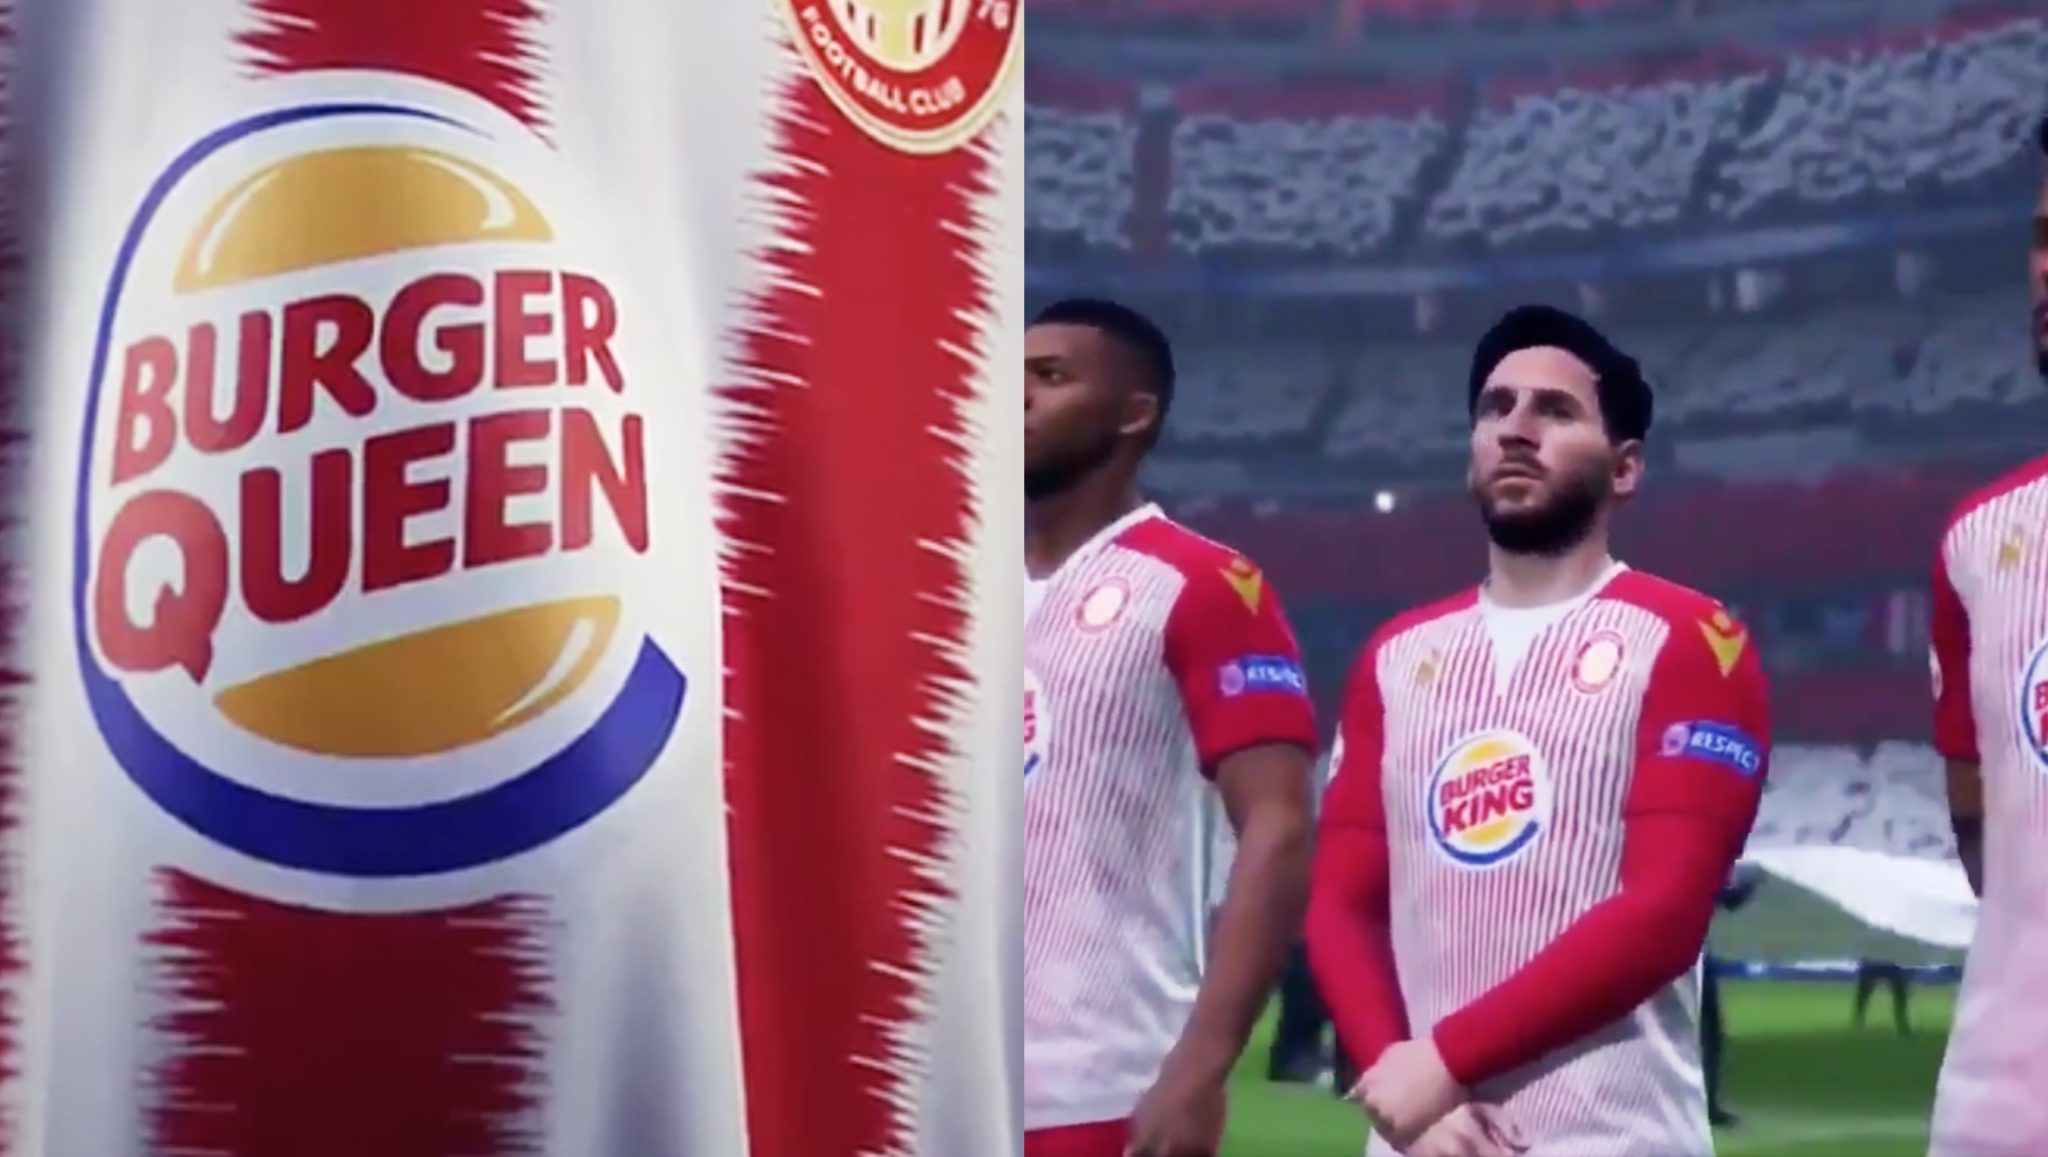 The Burger King challenge that made a League Two team the most